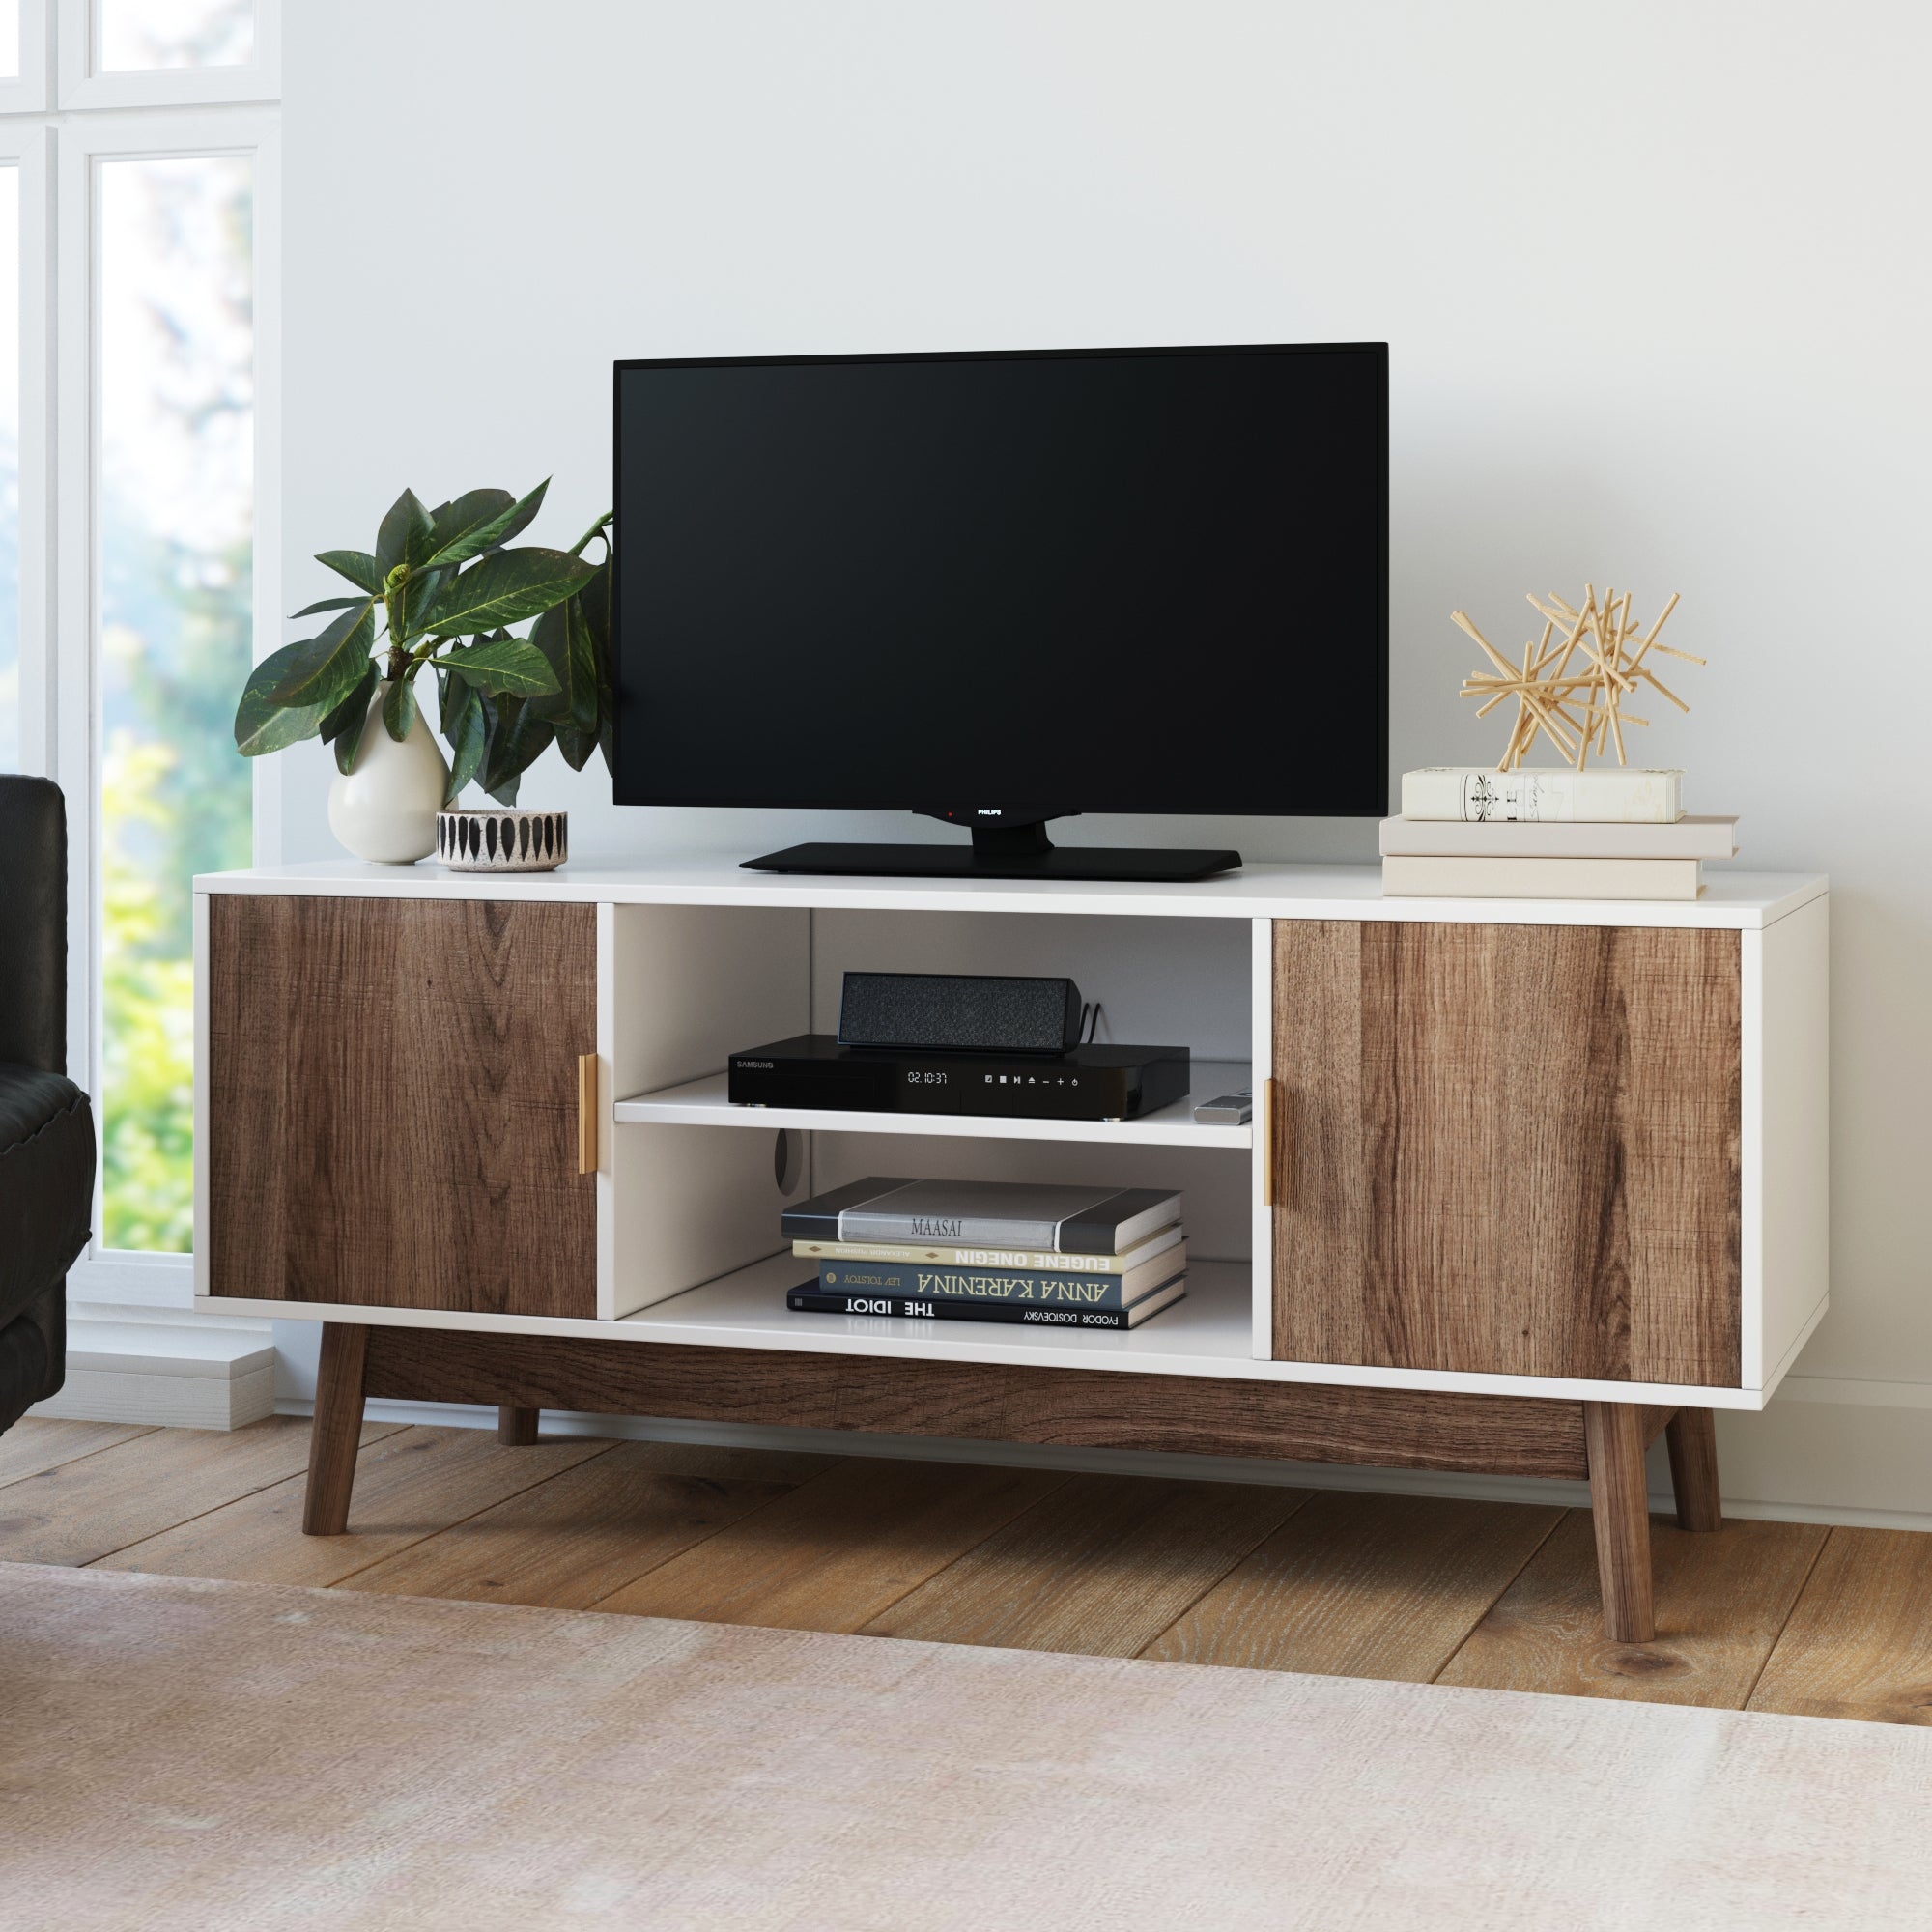 2-Door Nathan White Cabinet James | Storage TV with Modern Wesley